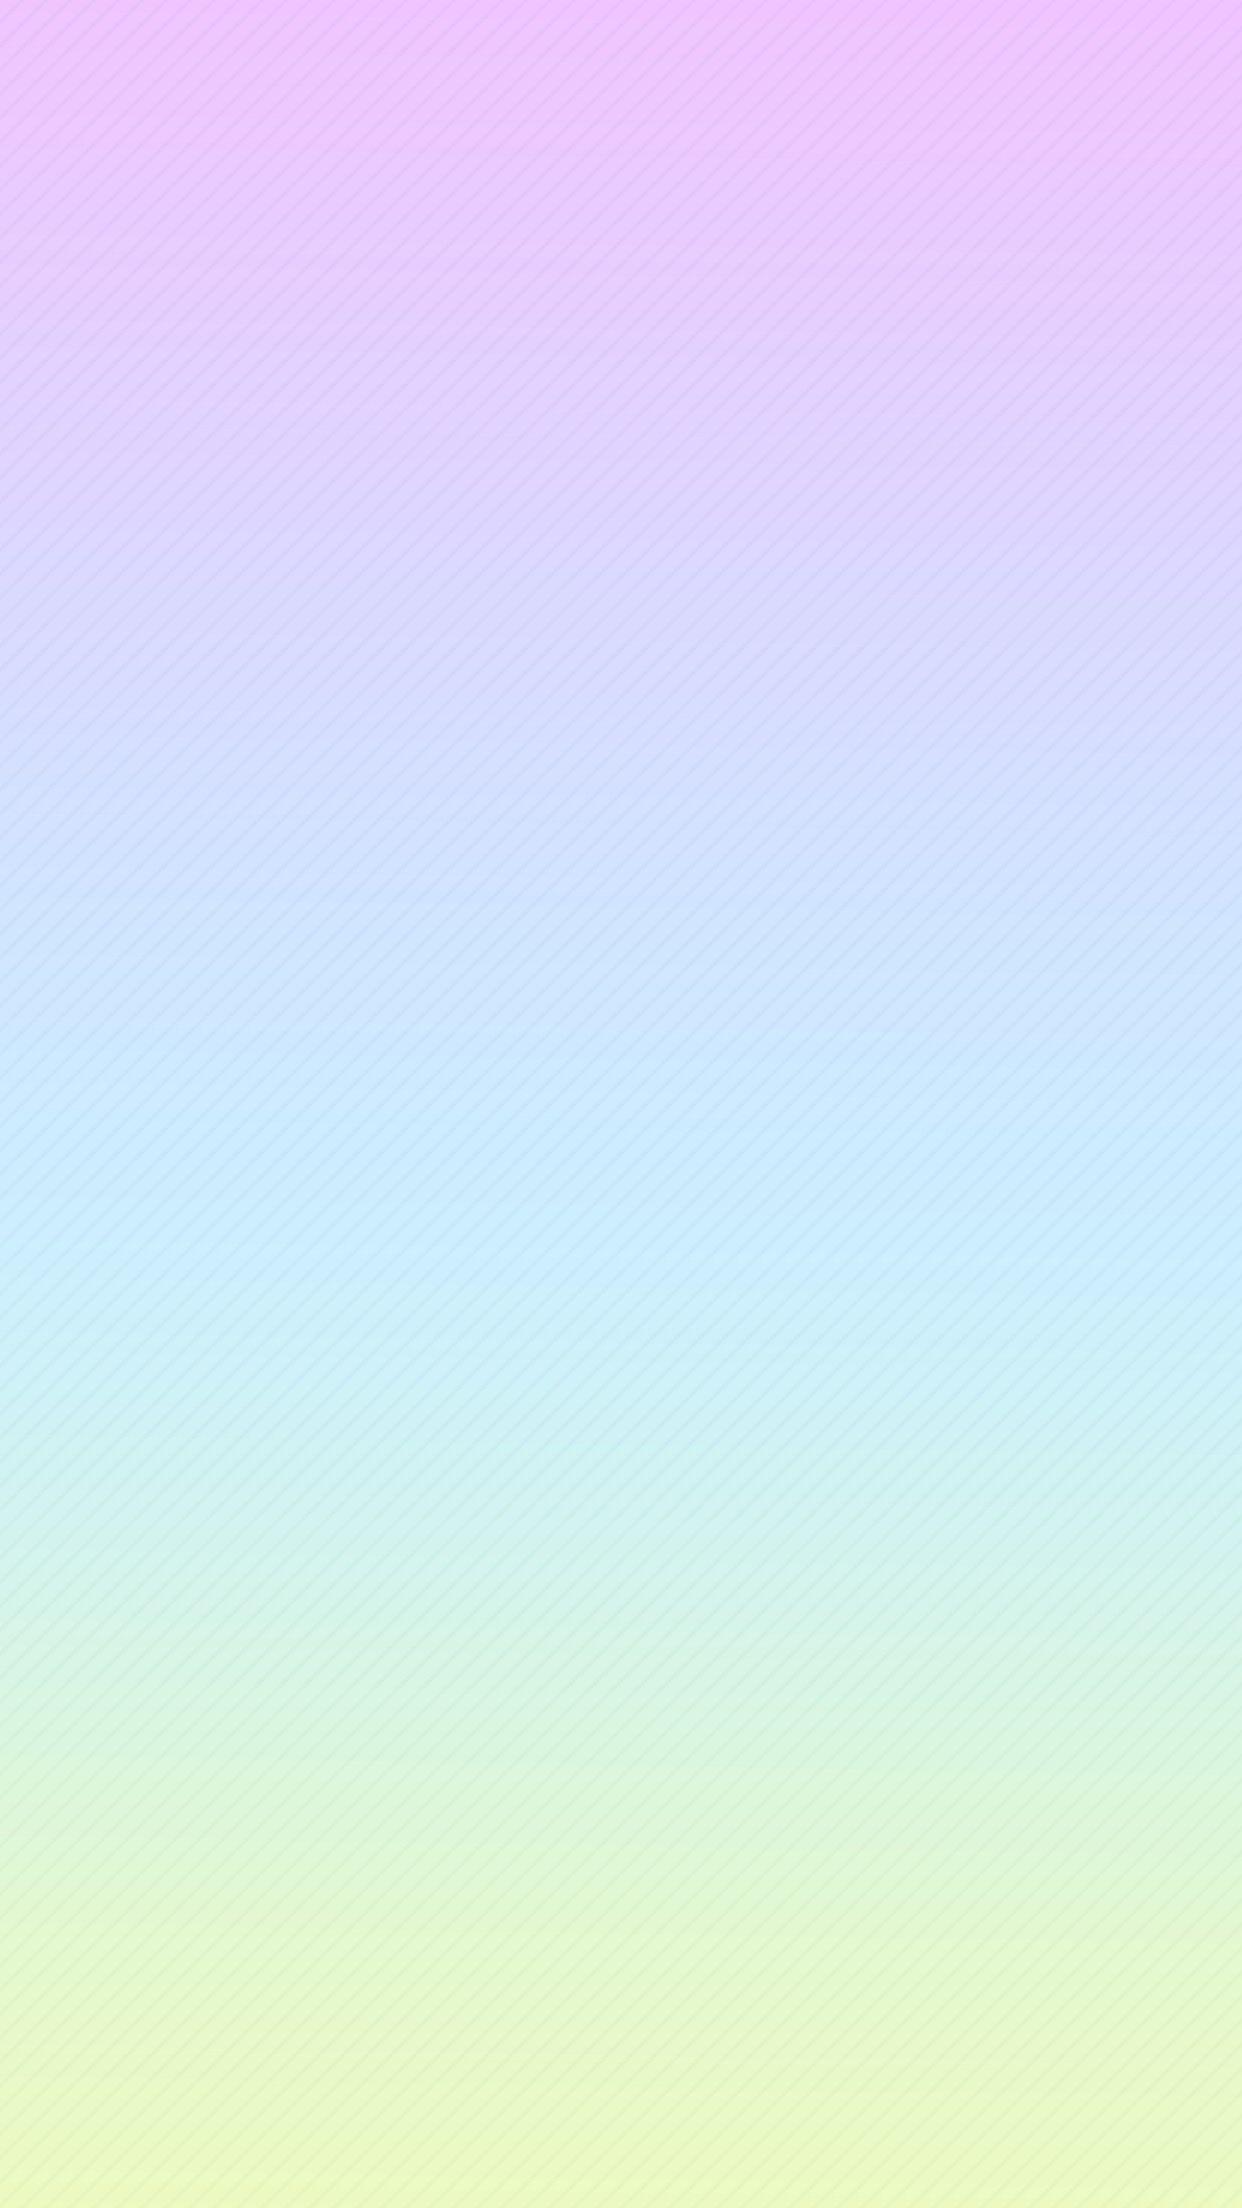 Wallpaper, background, iPhone, Android, HD, pink, blue, purple